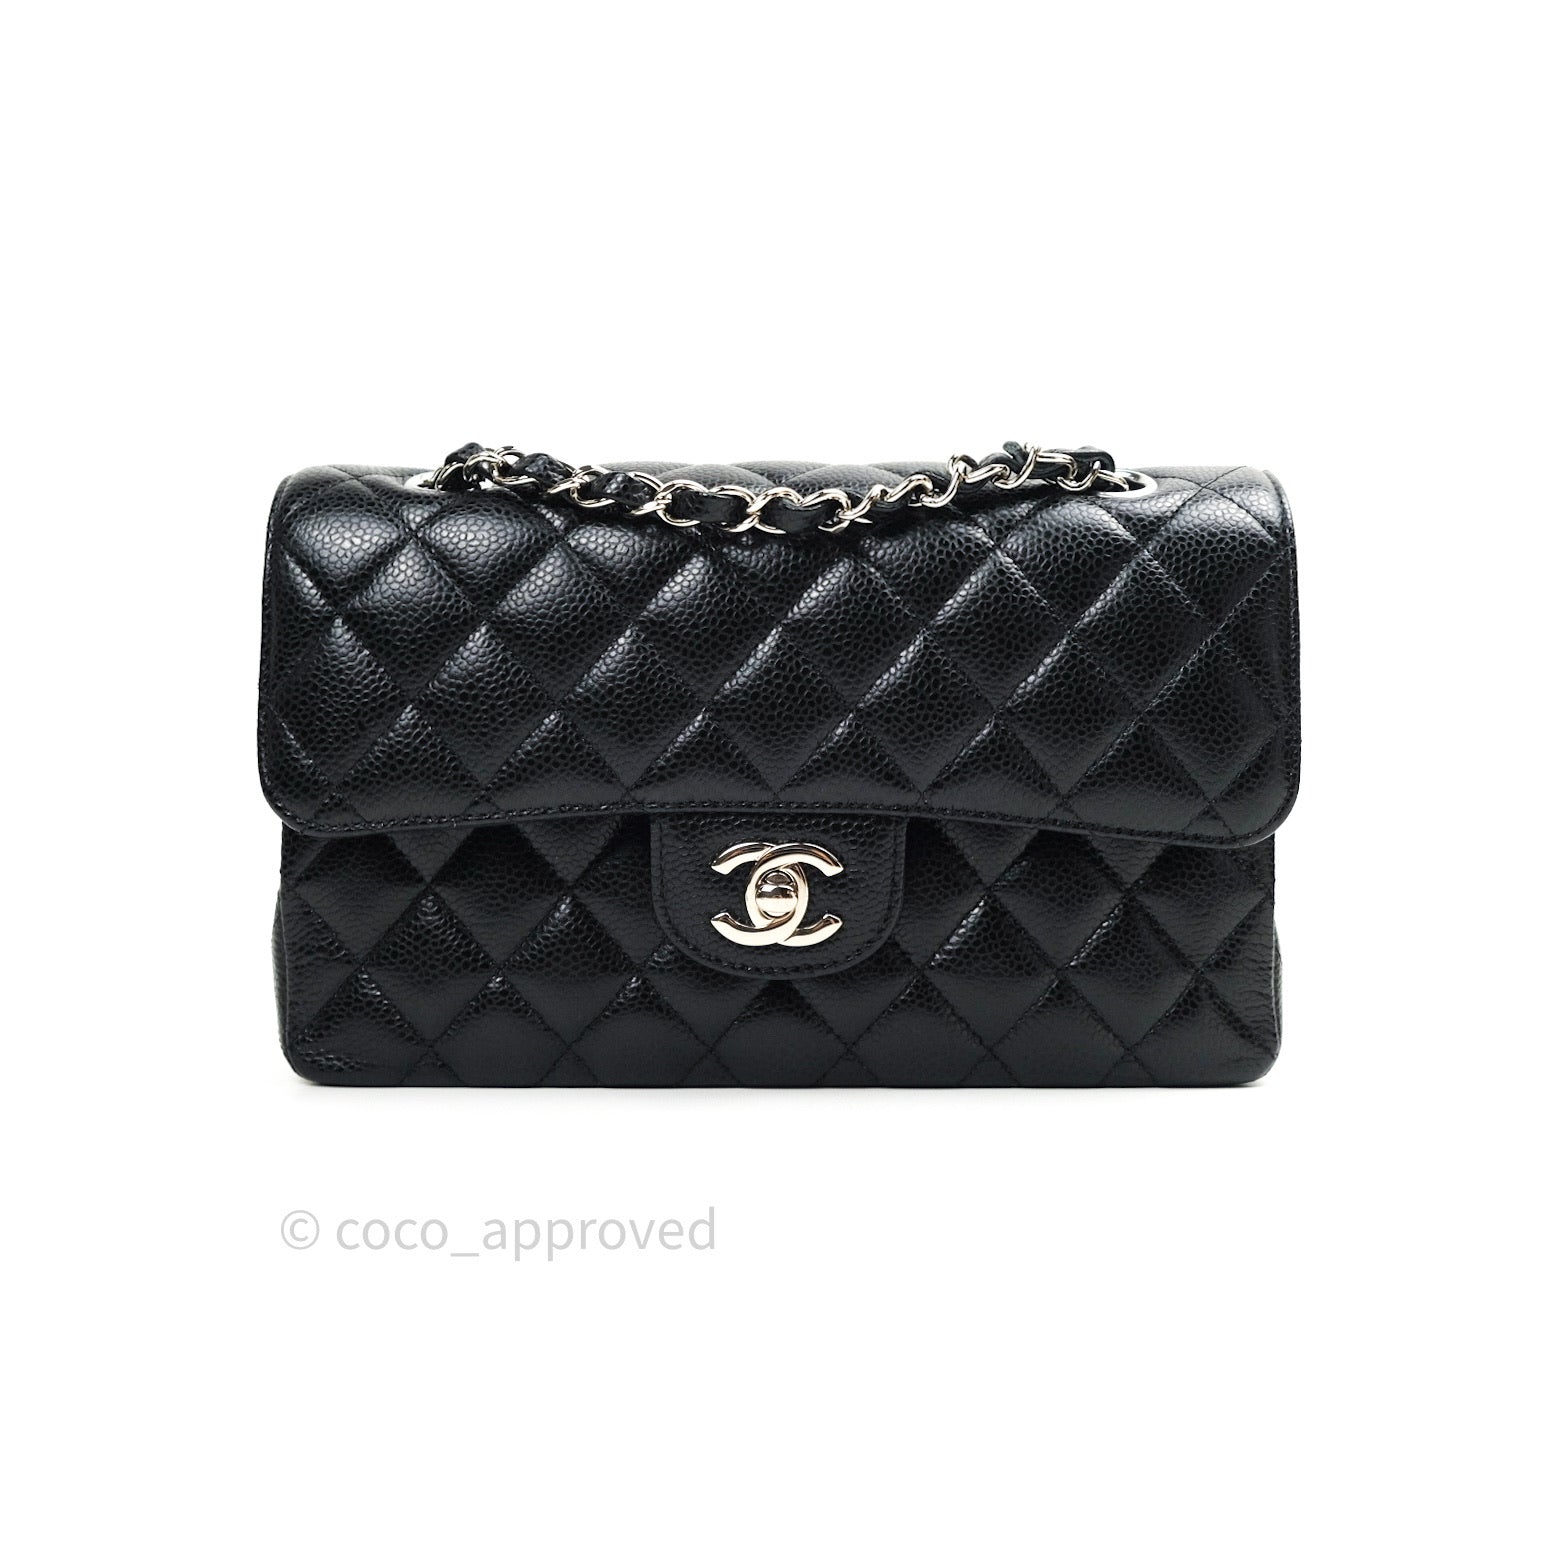 CHANEL, Bags, Sold Chanel Black Caviar Small Classic Flap